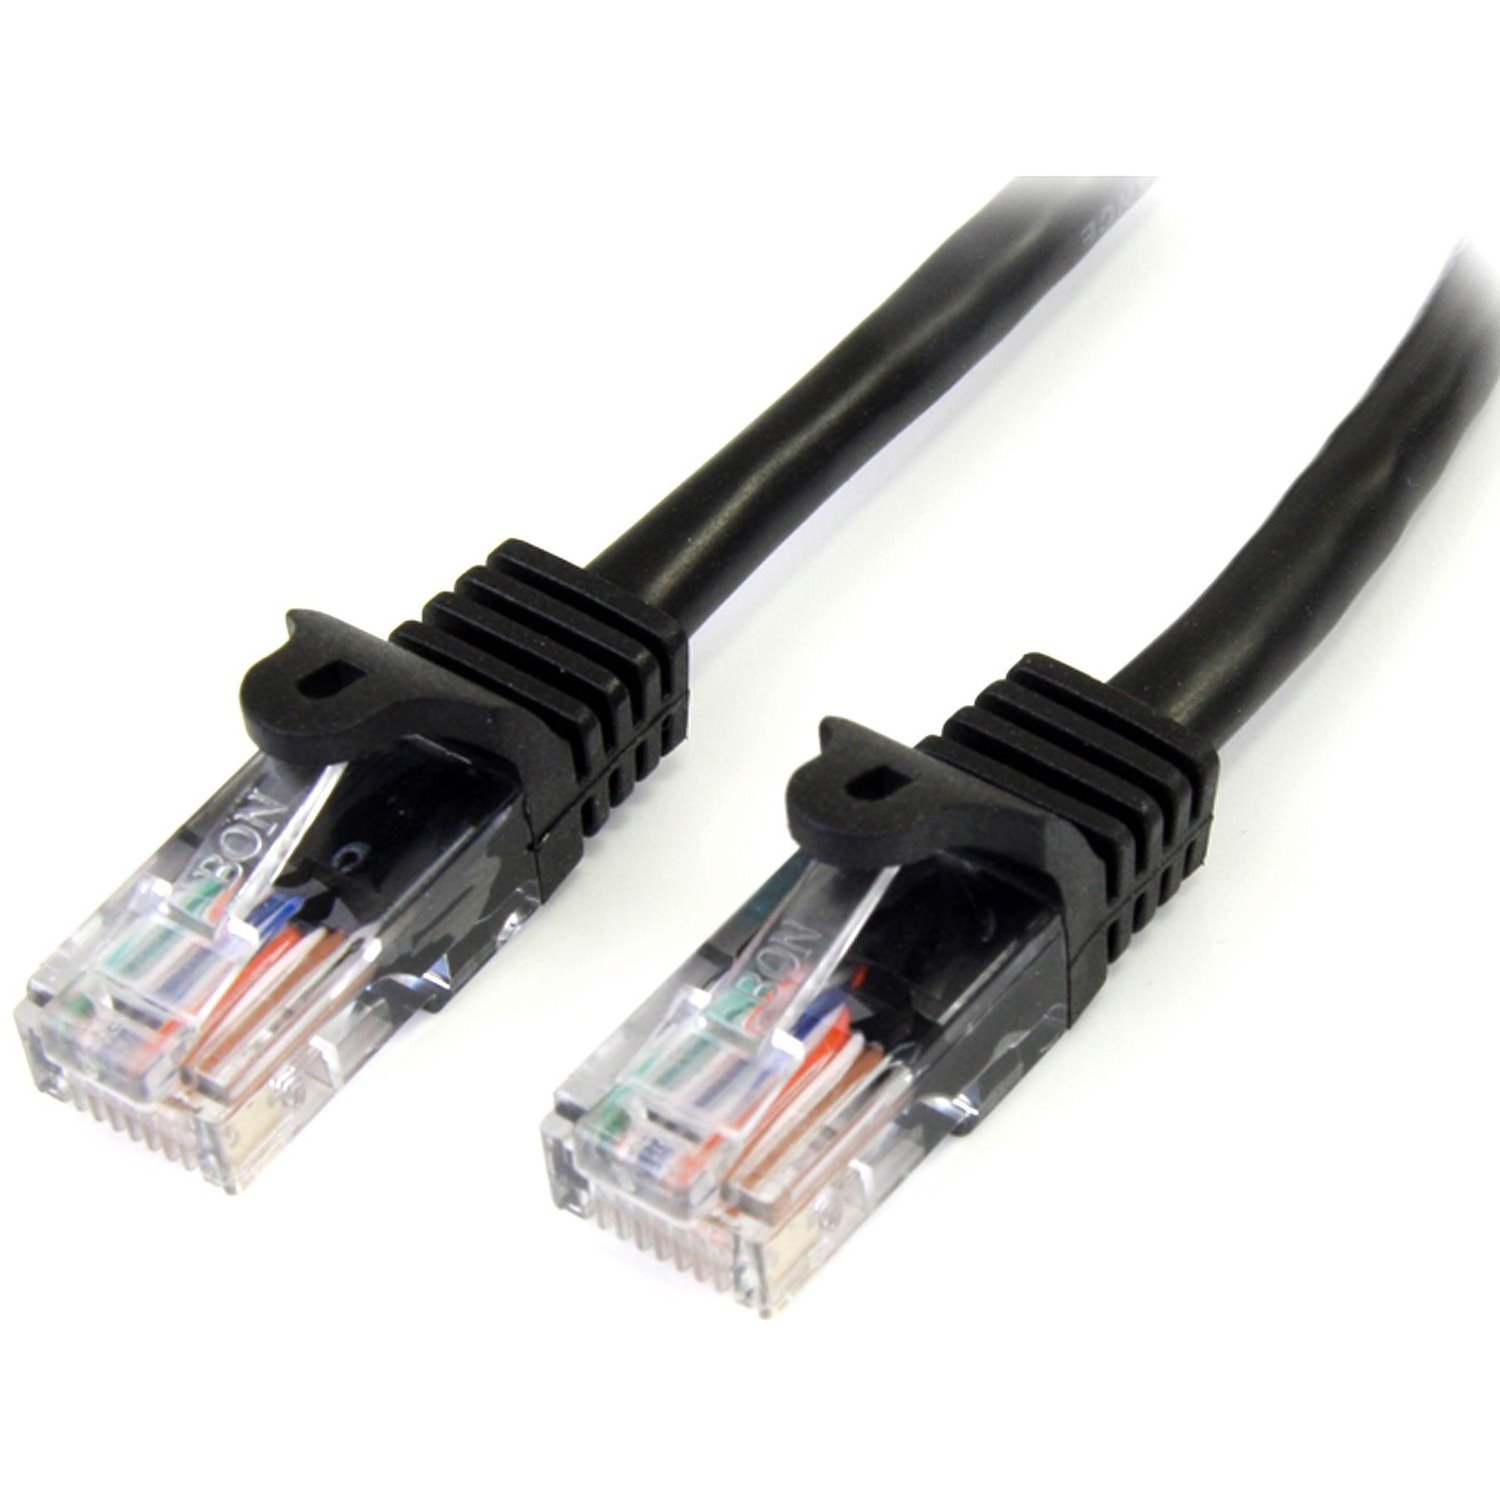 StarTech.com 3 m Black Cat5e Snagless RJ45 UTP Patch Cable - 3m Patch Cord - Ethernet Patch Cable - RJ45 Male to Male Cat 5e Cable